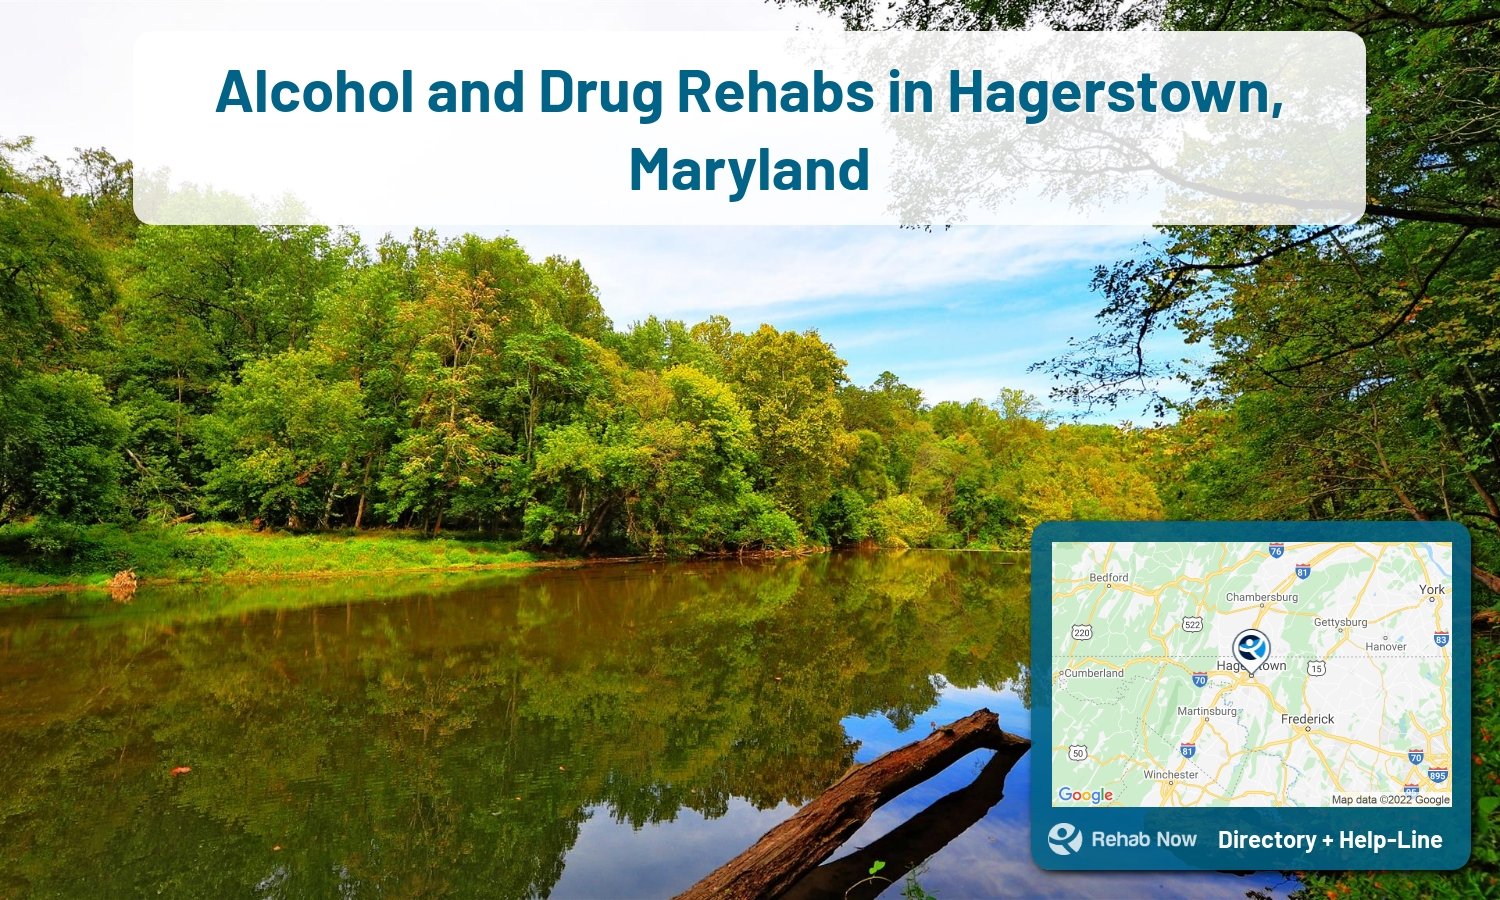 Hagerstown, MD Treatment Centers. Find drug rehab in Hagerstown, Maryland, or detox and treatment programs. Get the right help now!